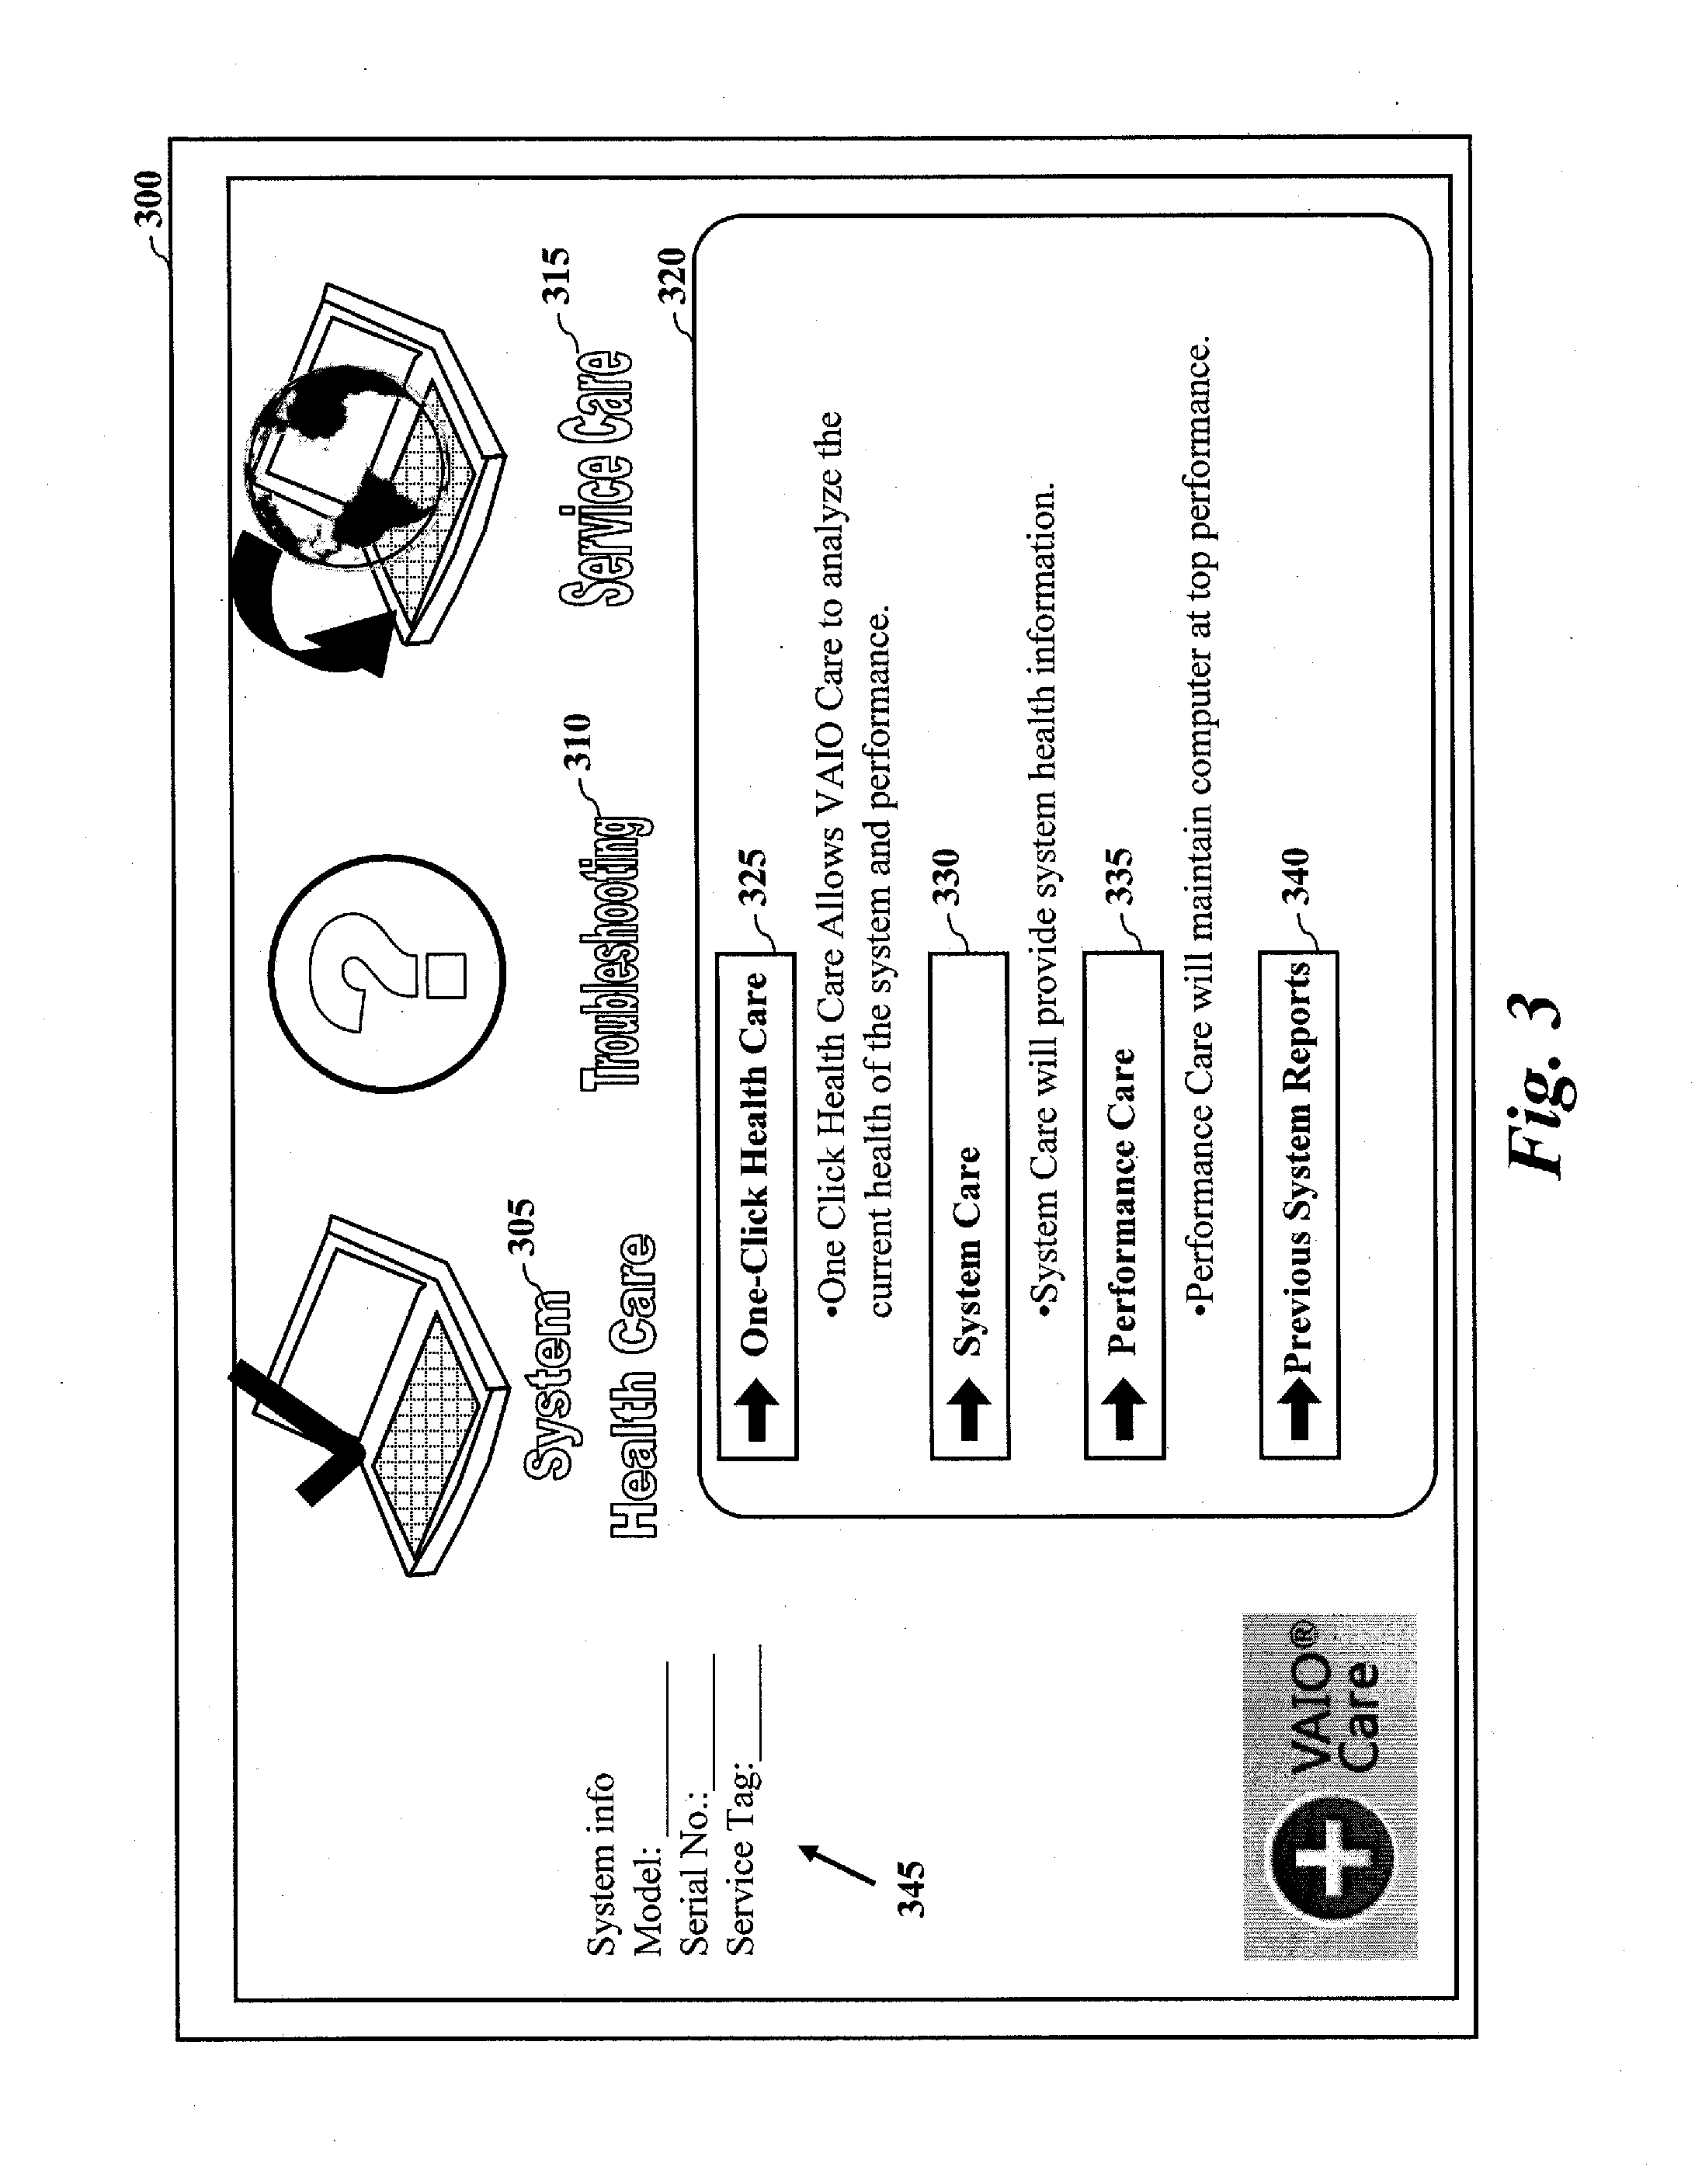 System health and performance care of computing devices